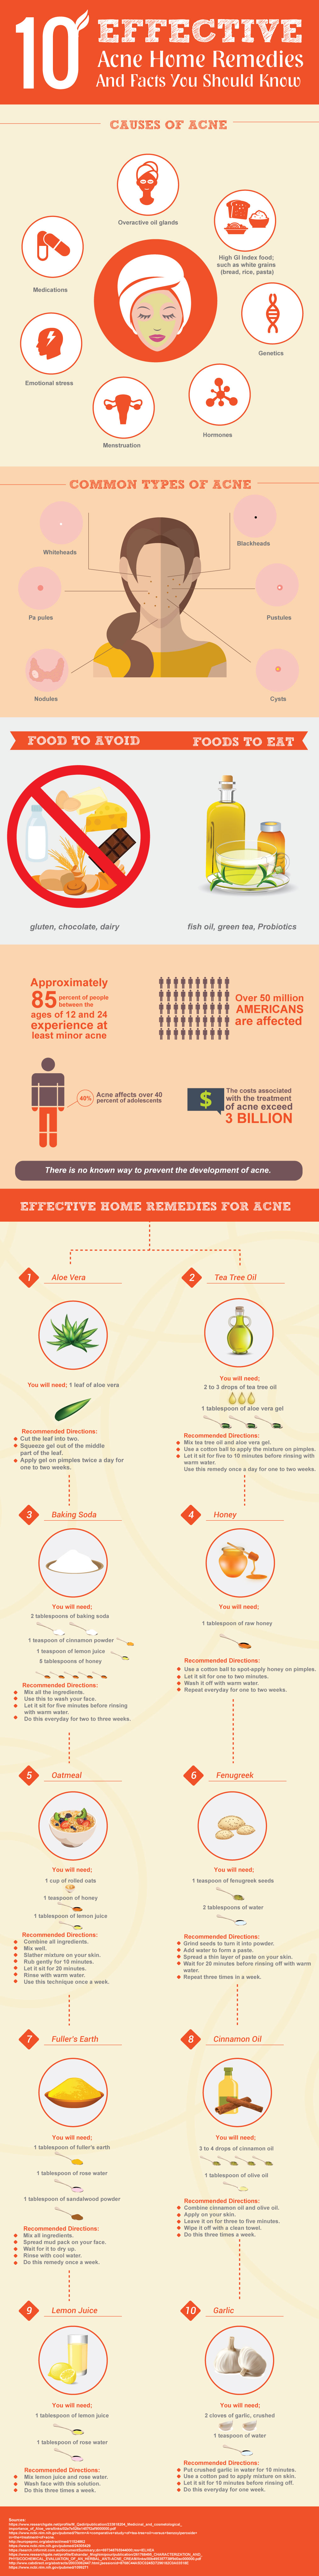 10 Effective Acne Remedies and Facts